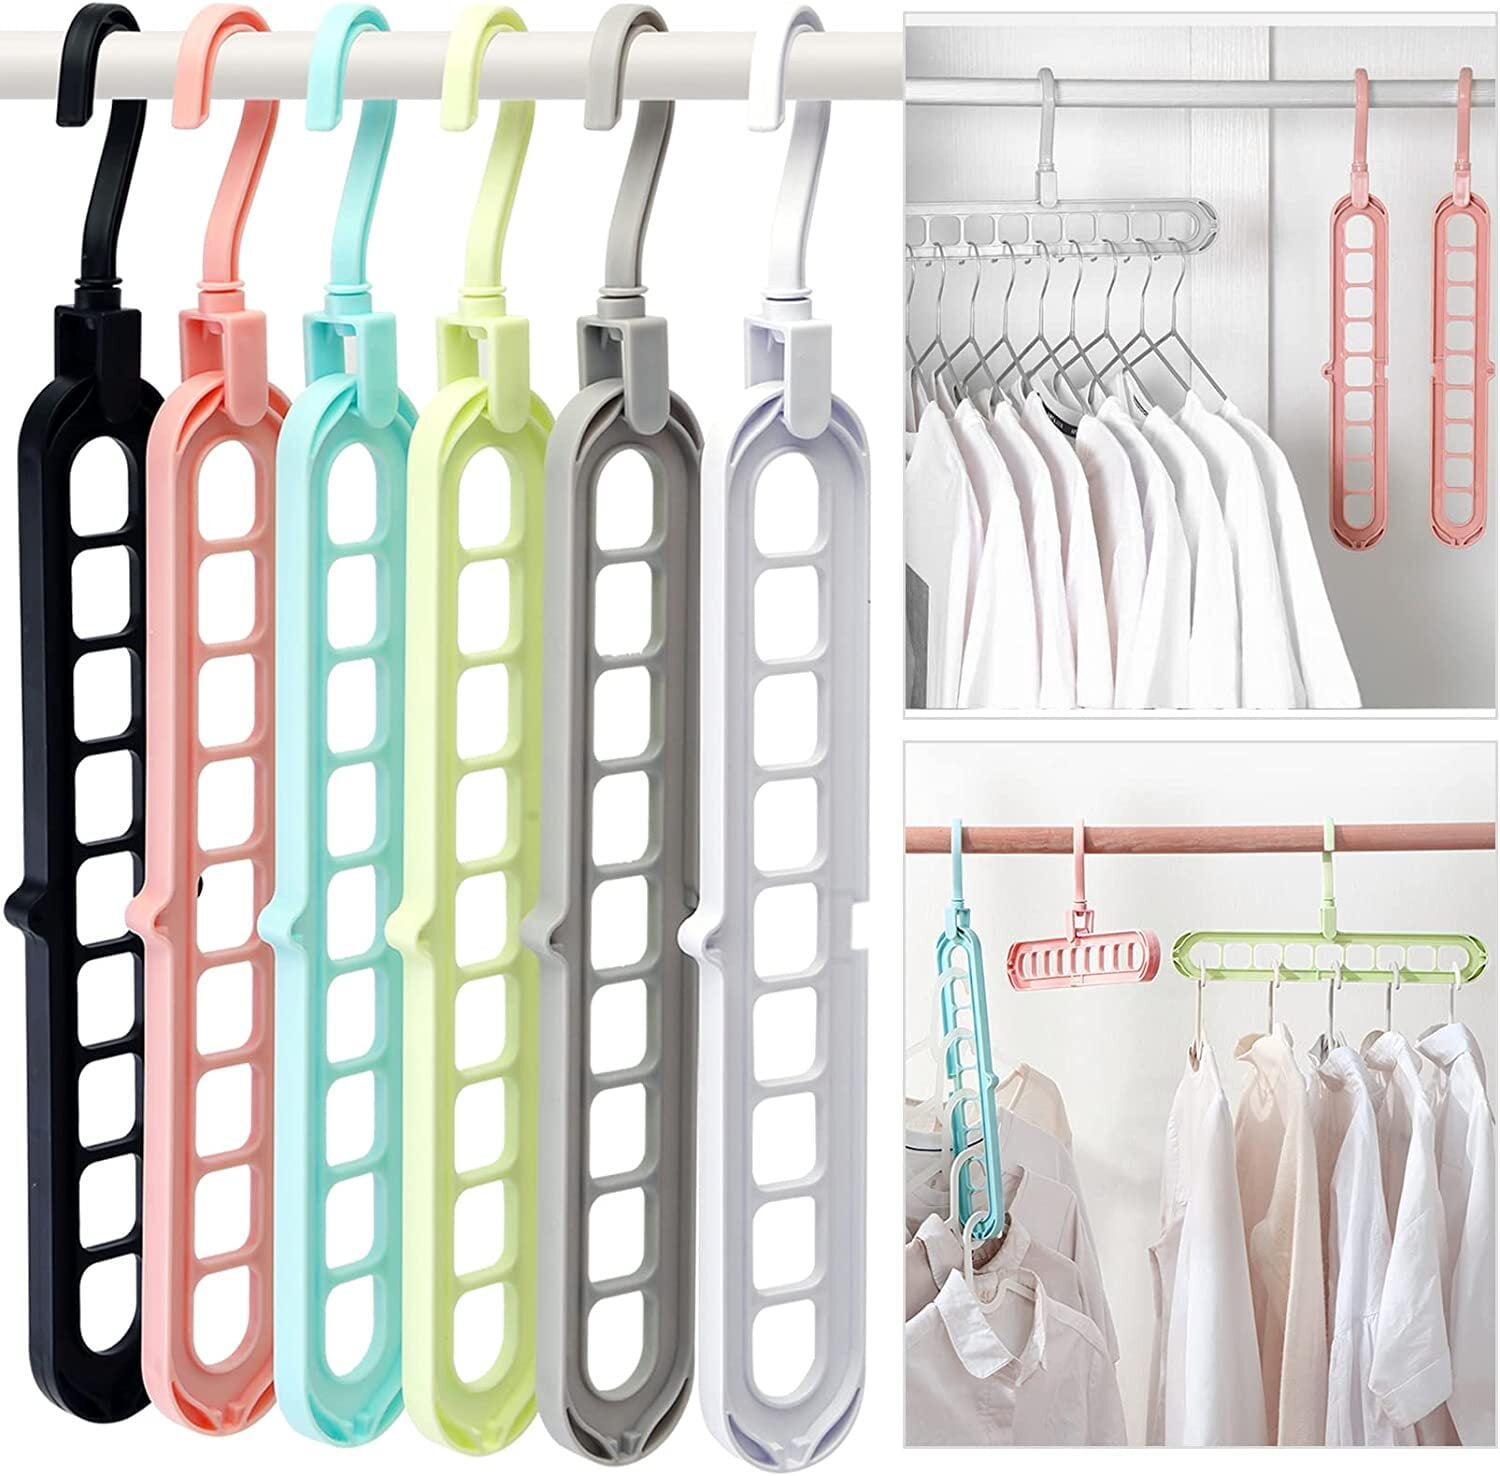 Friends House-Pack of 6 Magic Hangers Wardrobe Closet Organizers  Storage,Closet Organizer Space Saving Sturdy Pink and Blue Plastic Hangers  for Home